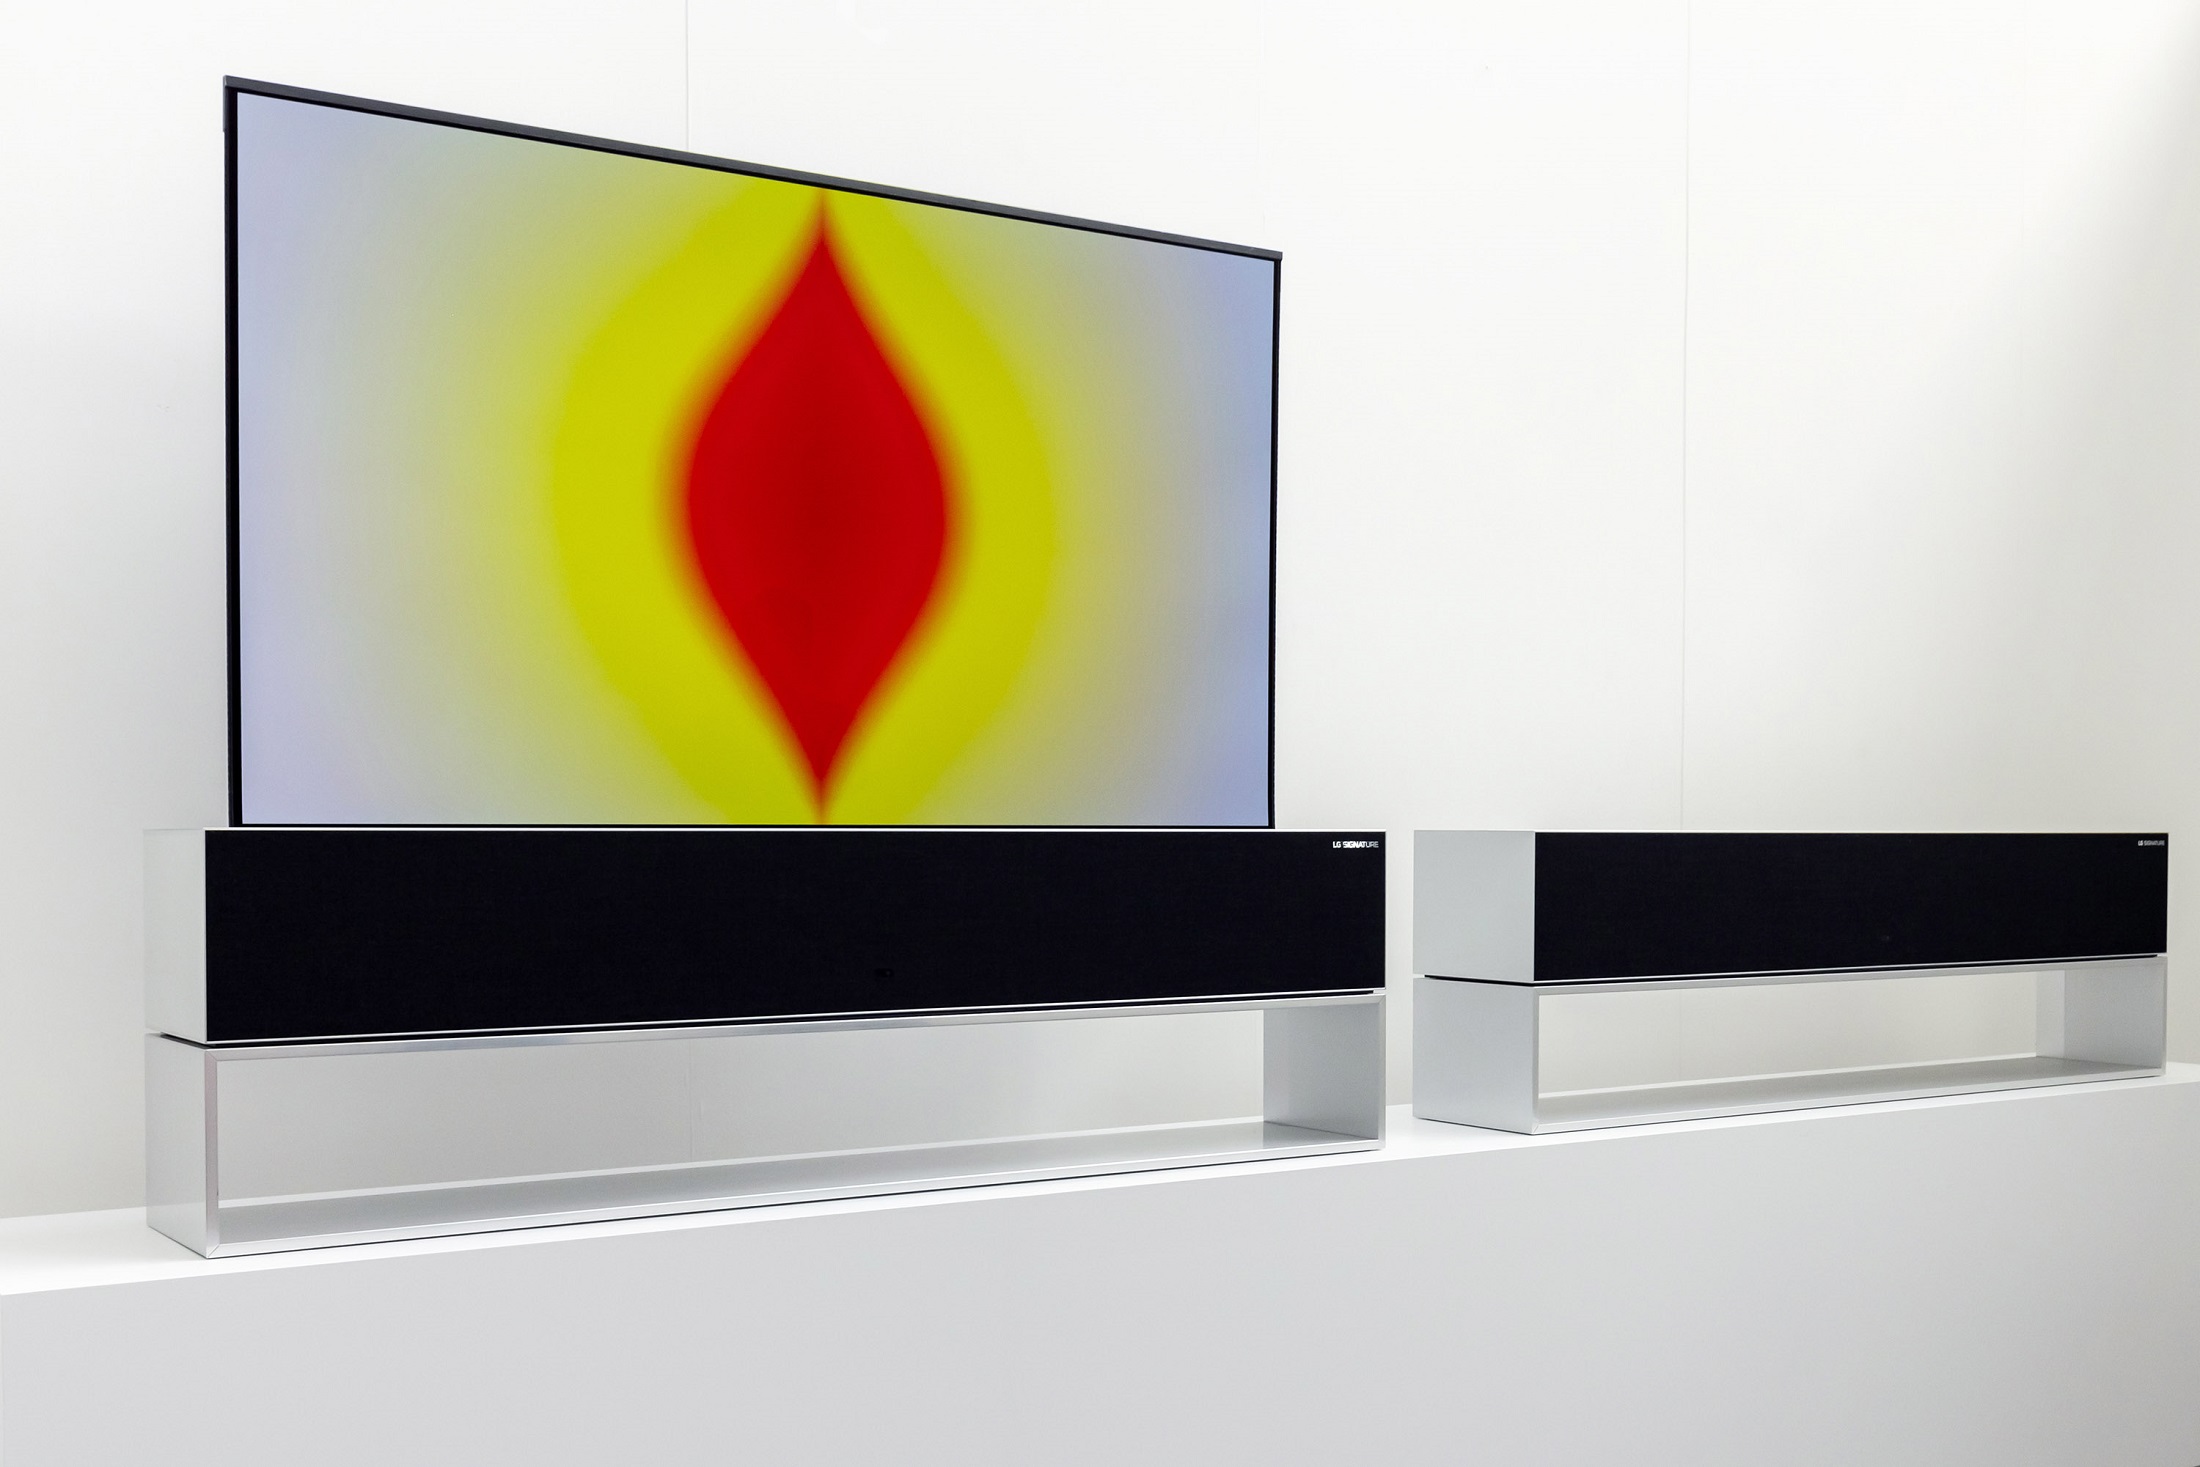 An LG SIGNATURE OLED R beautifully displaying Anish Kapoor’s colorful media art in its Full View mode, next to another with its screen hidden